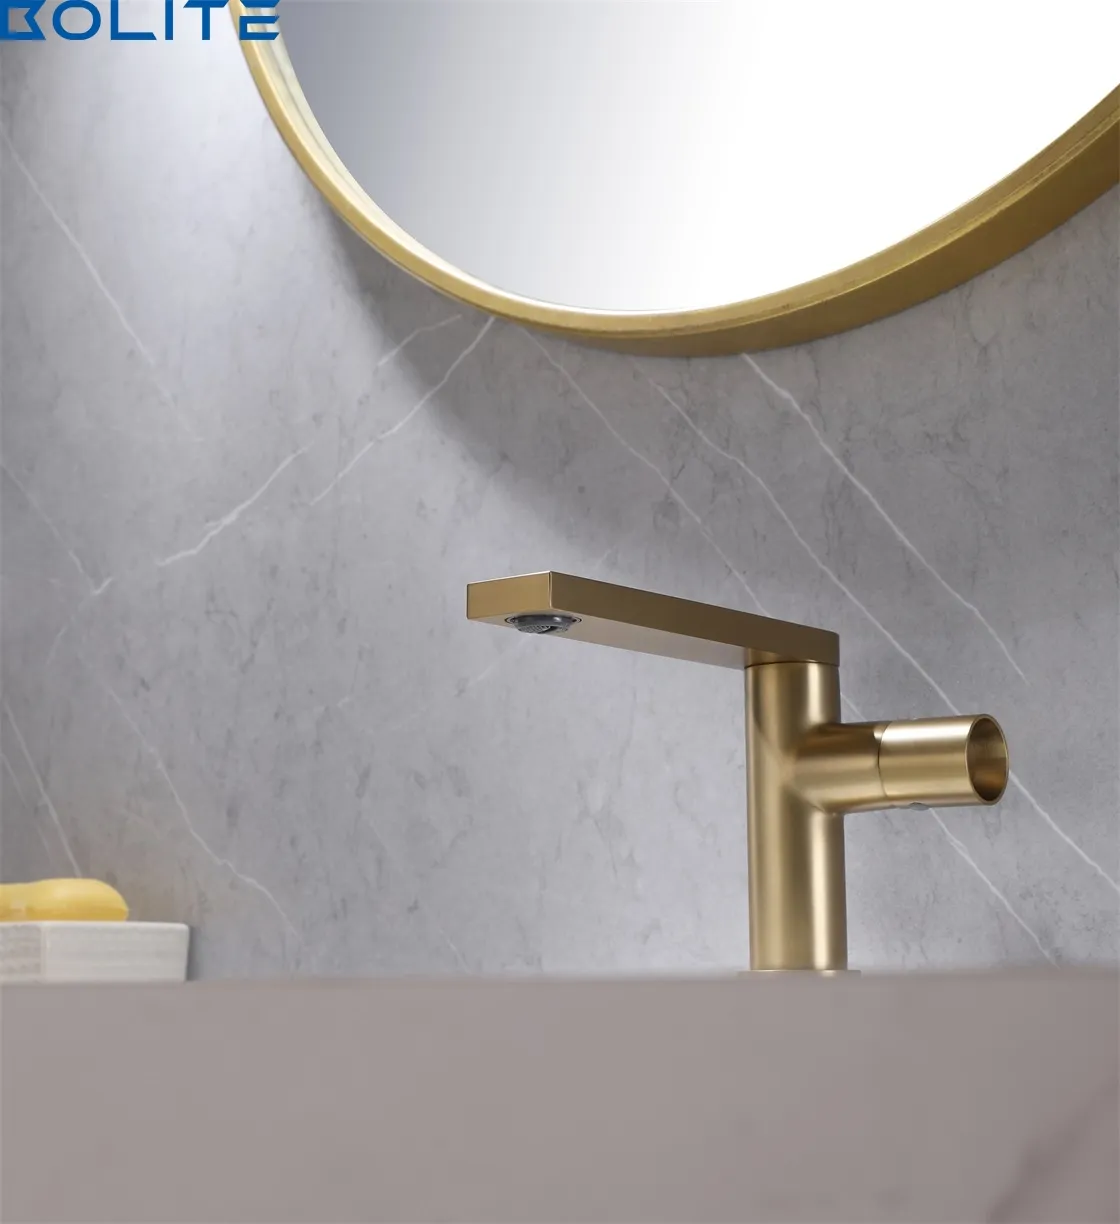 2023 rose gold black golden bathroom sanitary ware wash basin sink single lever handle mounted hot cold water faucets mixer taps